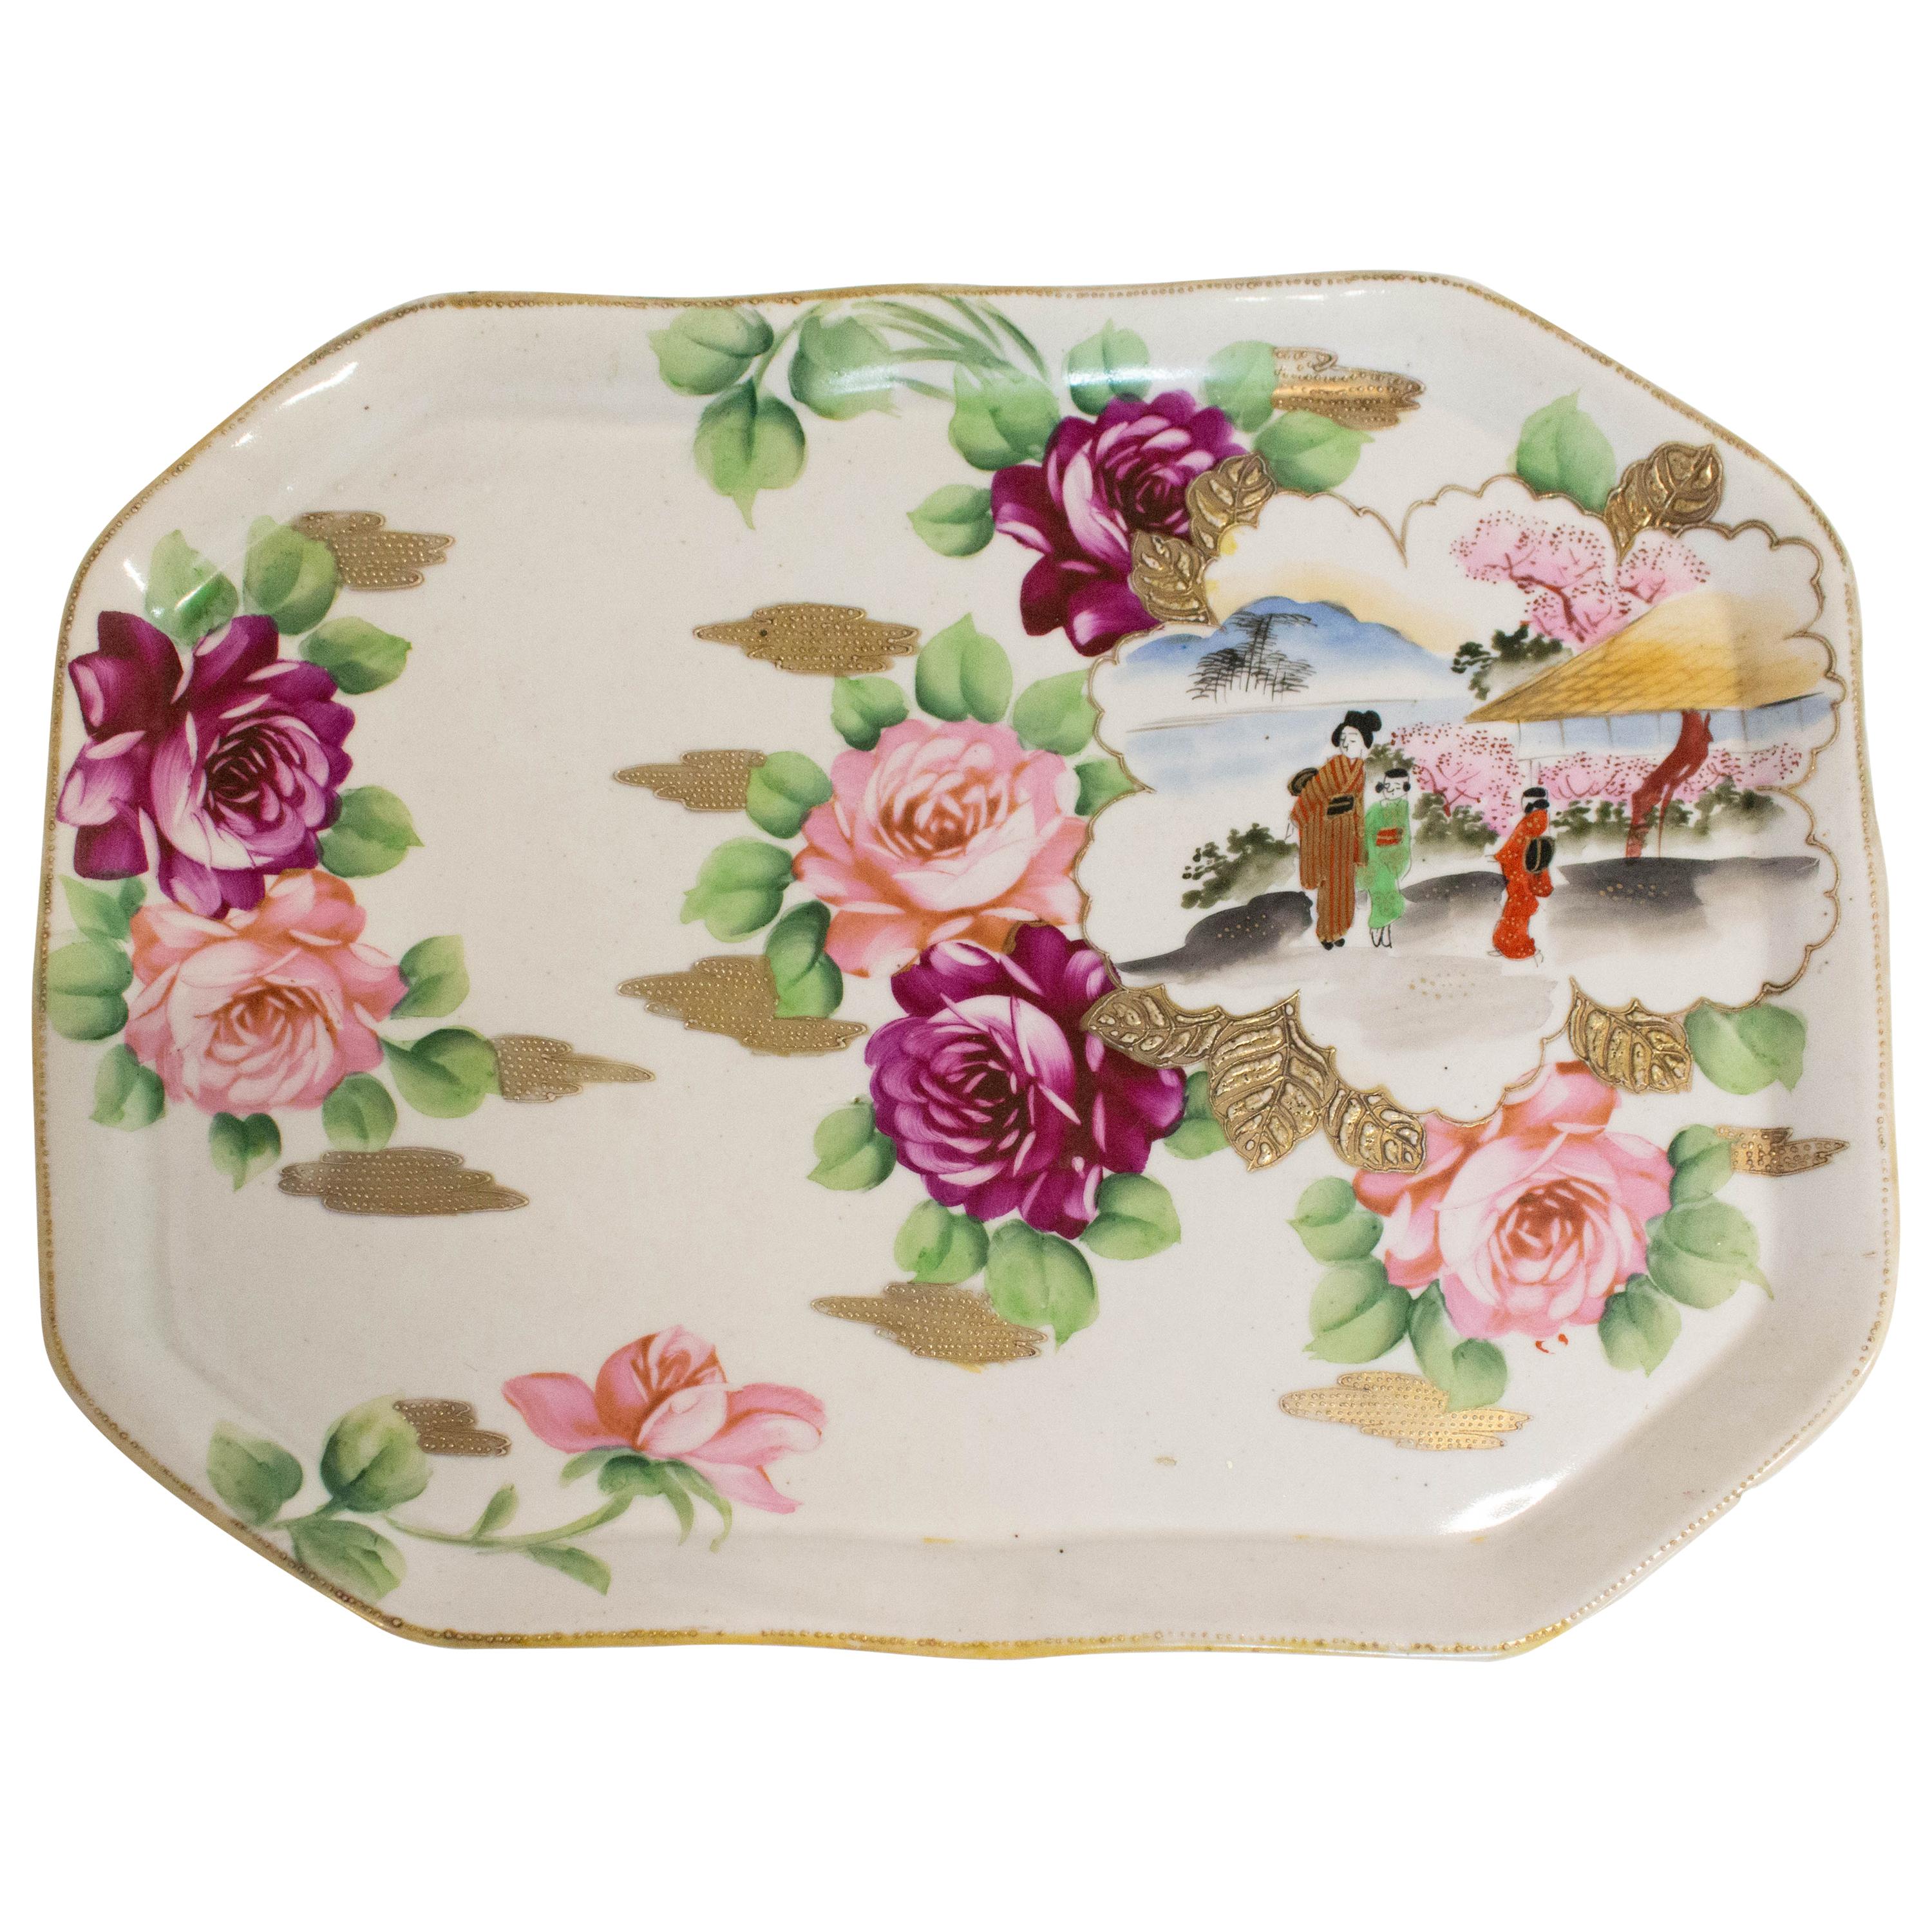 Chinese plate or tray, hand painted porcelain, circa 1880
with golden details
In good condition

For shipping: 2 x 26.5 x 35 cm 1kg.

